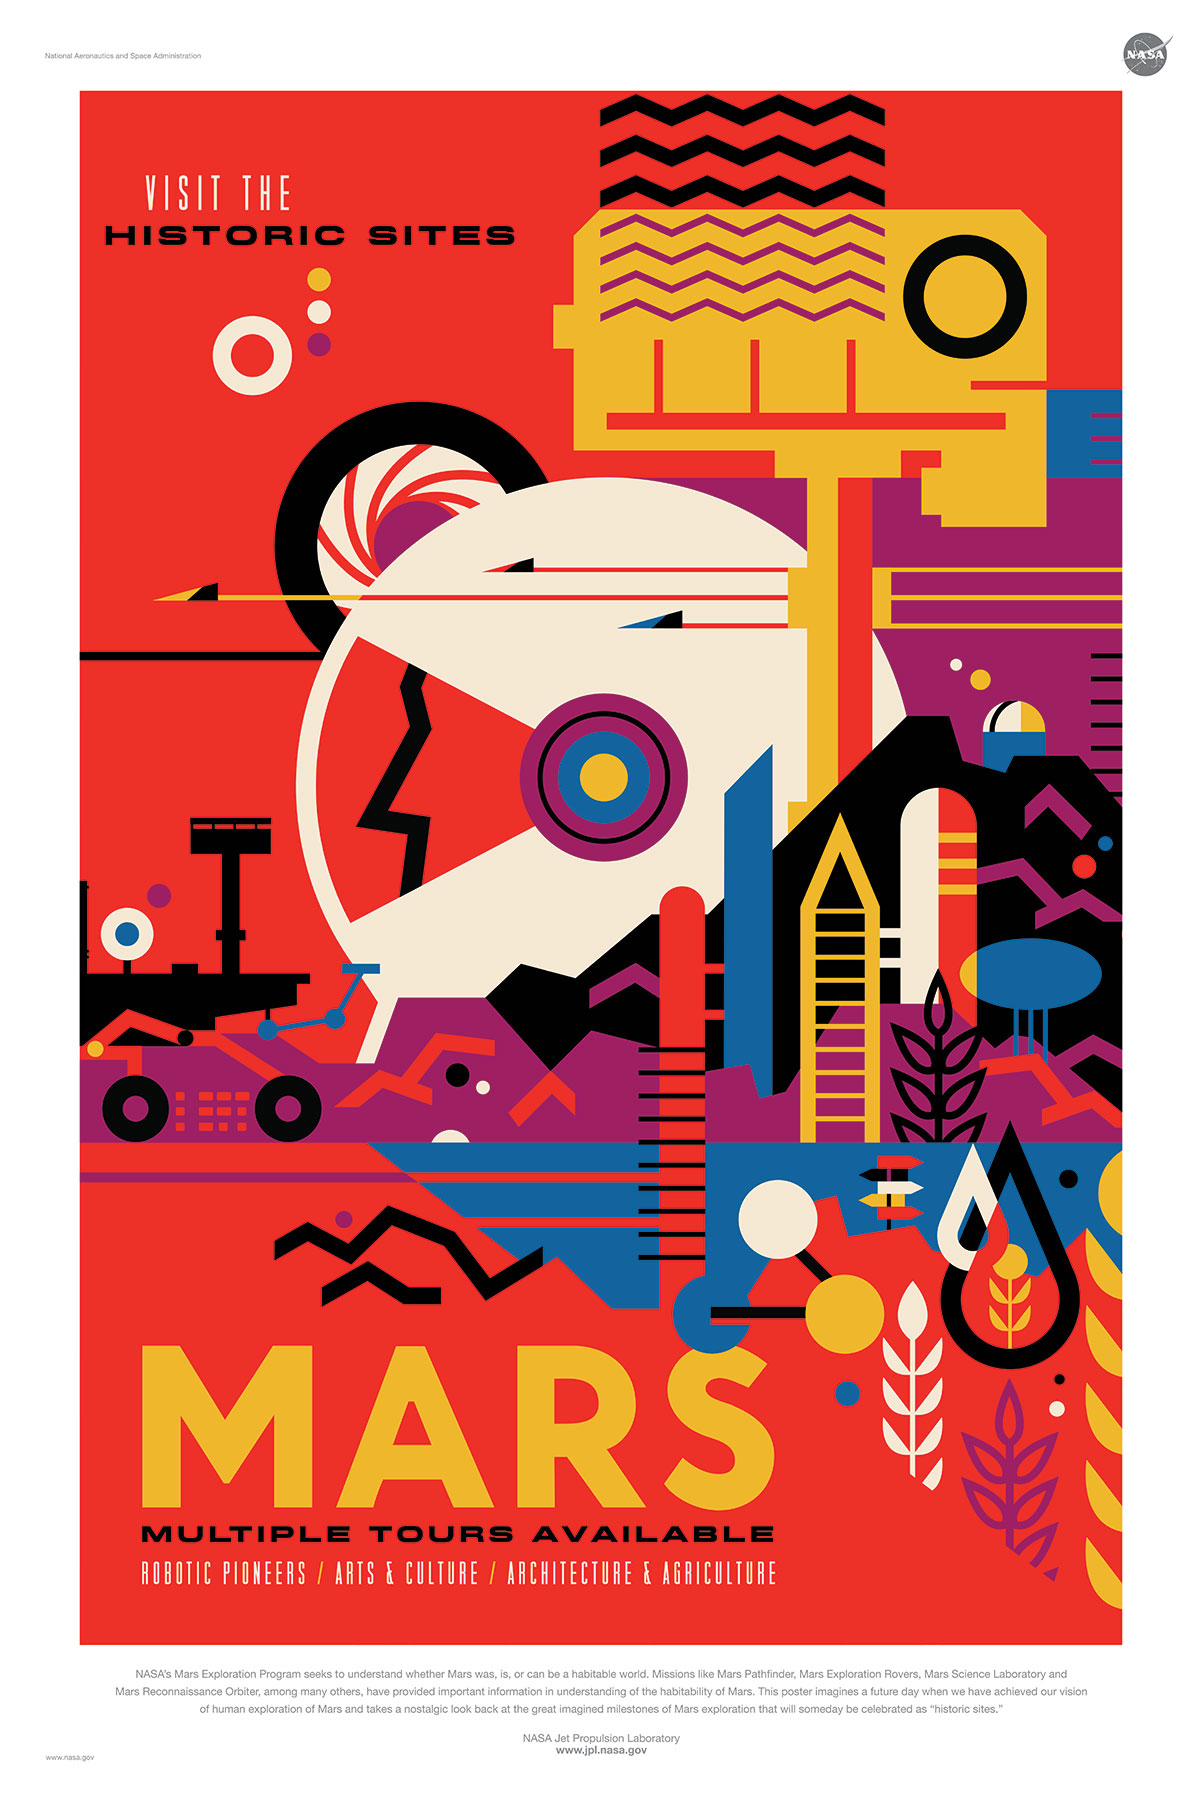 Download NASA's funky, retro space travel posters for free | News